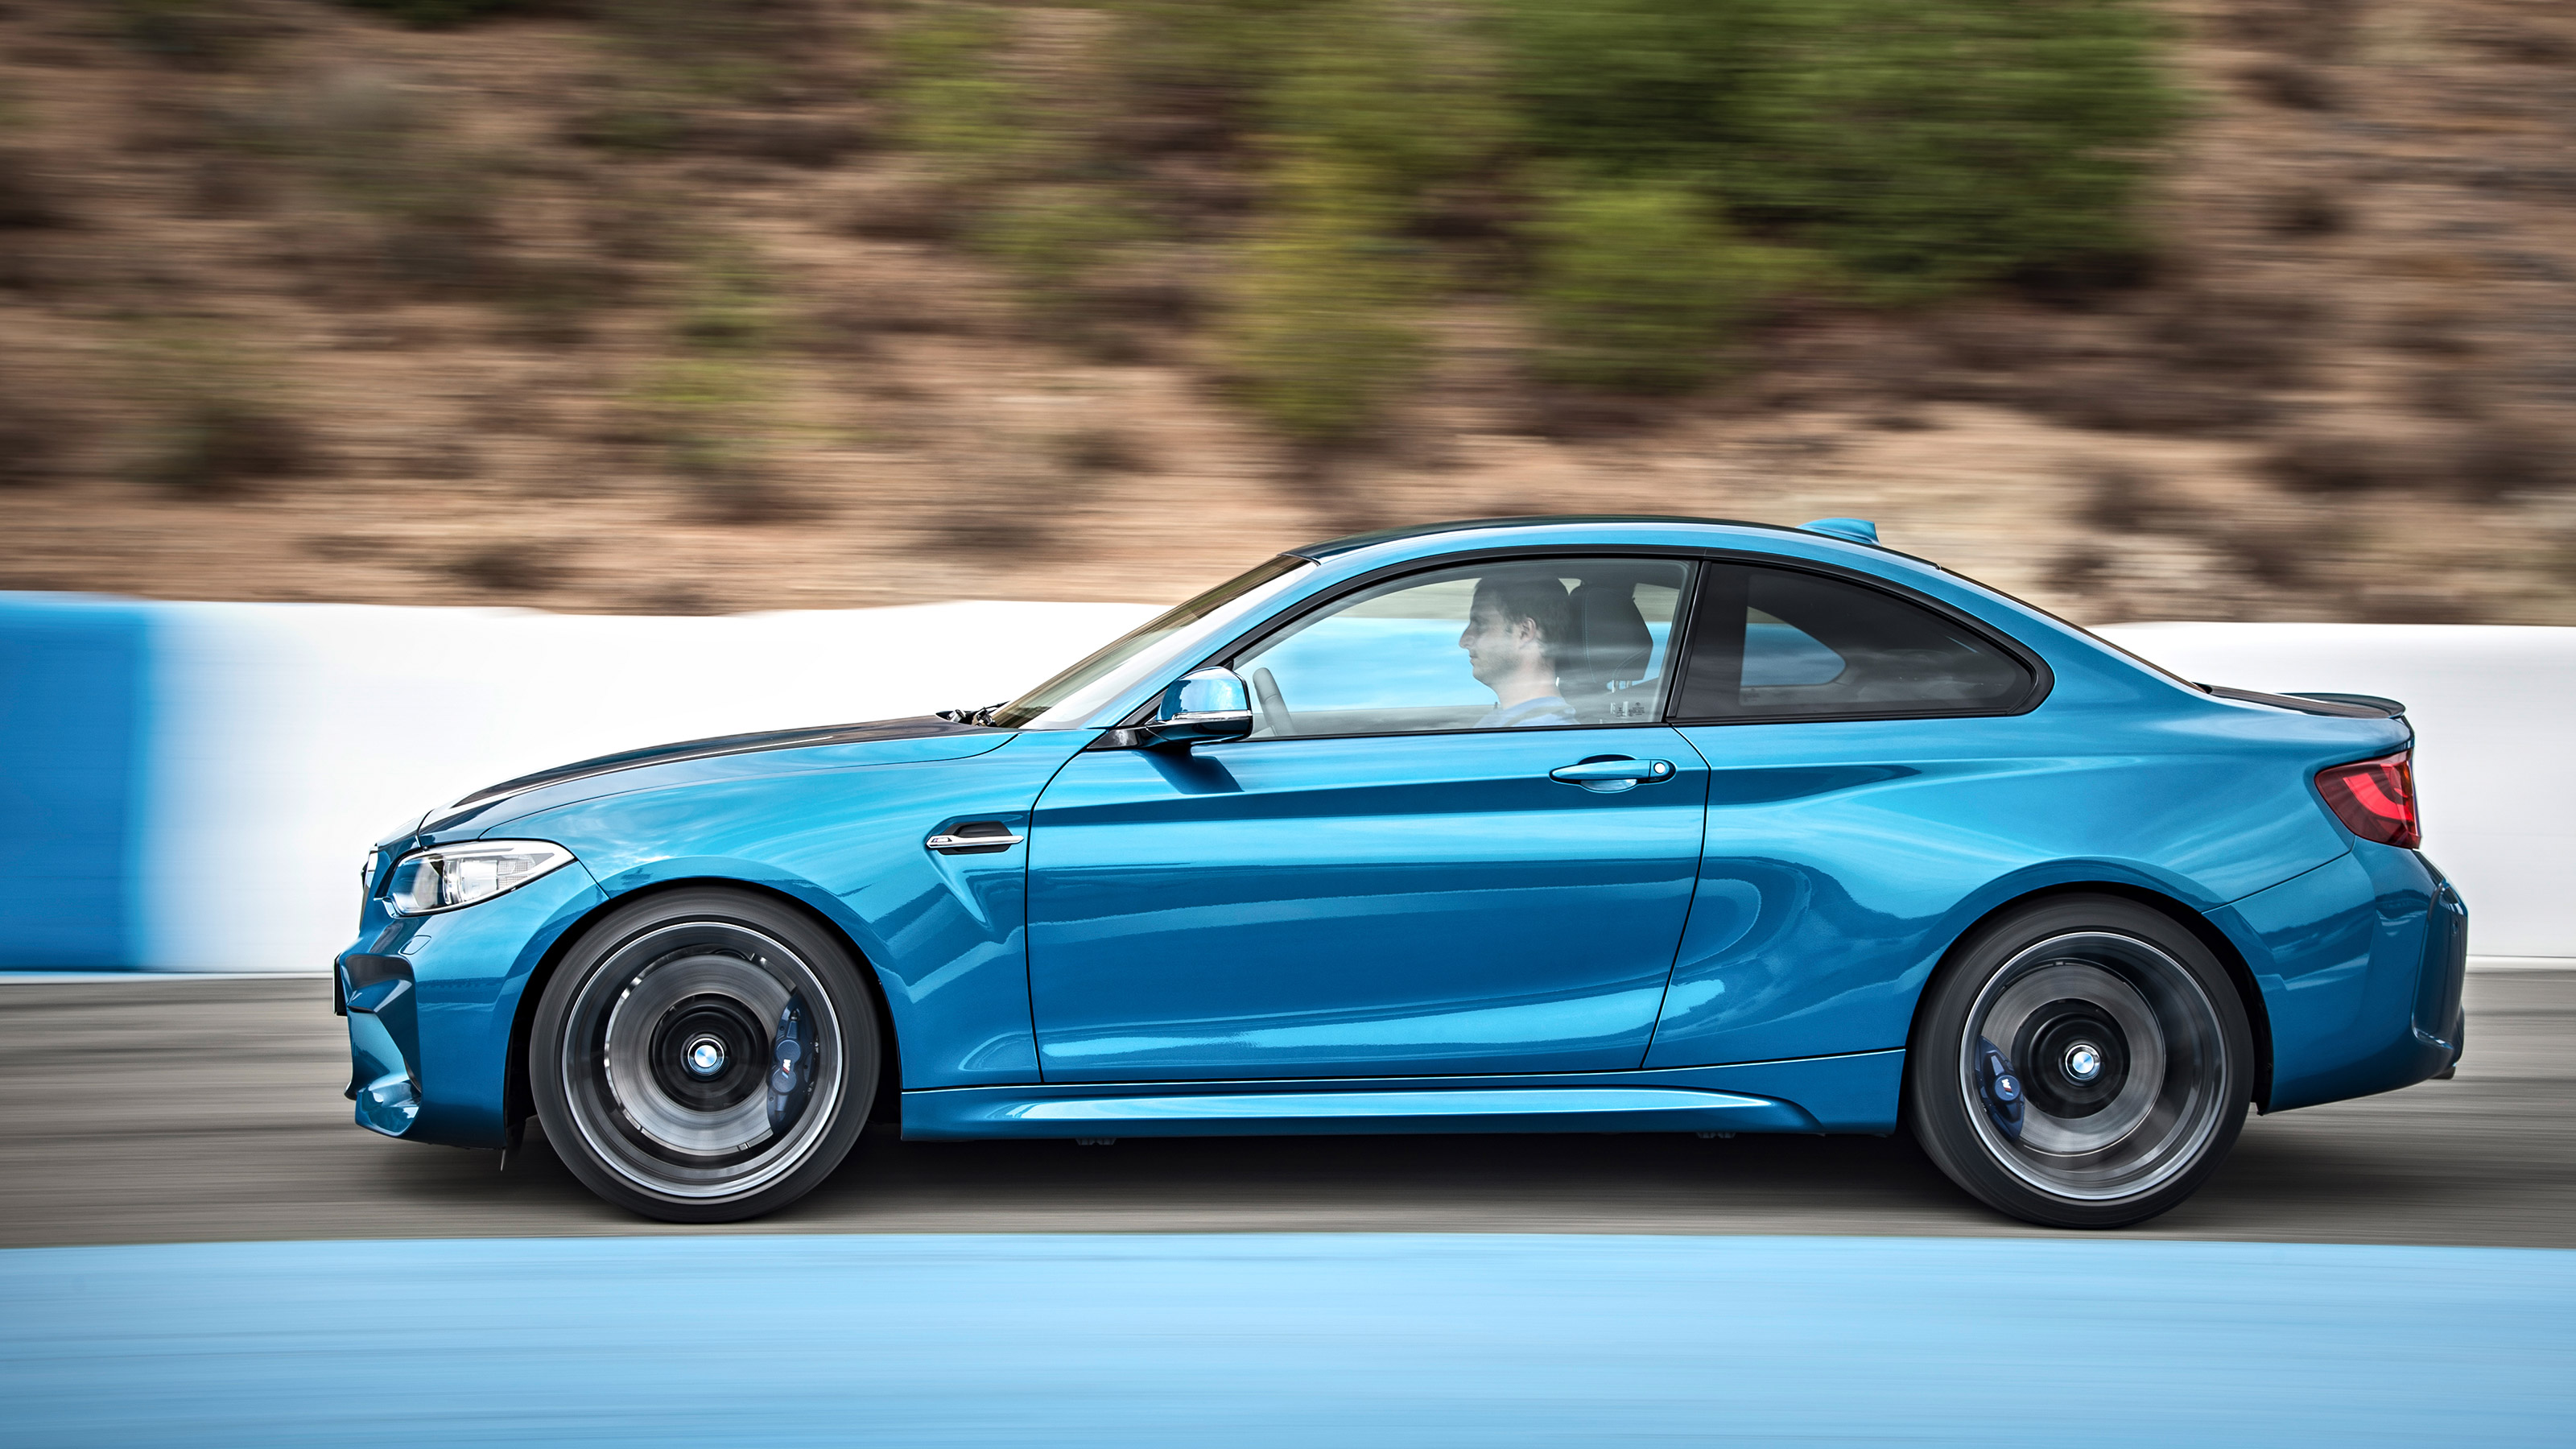 BMW M2 review - price, specs and 0-60 time